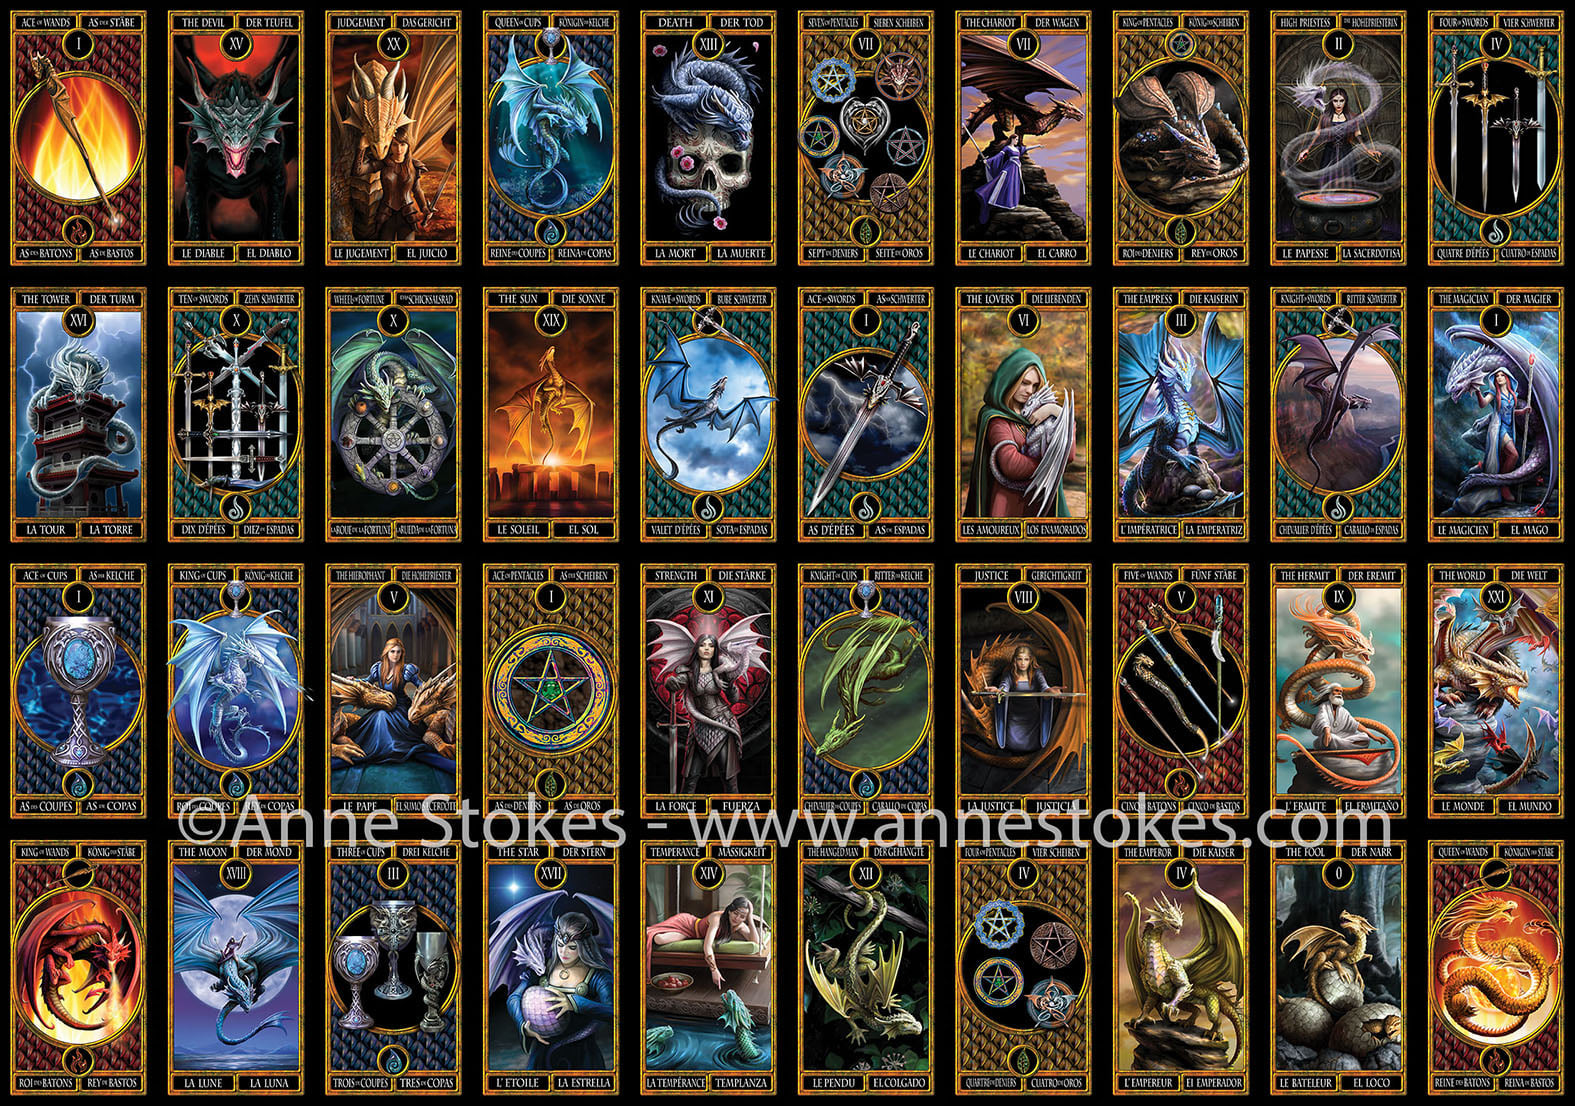 Dragon Tarot card sets Anne Stokes – FairyPuzzled